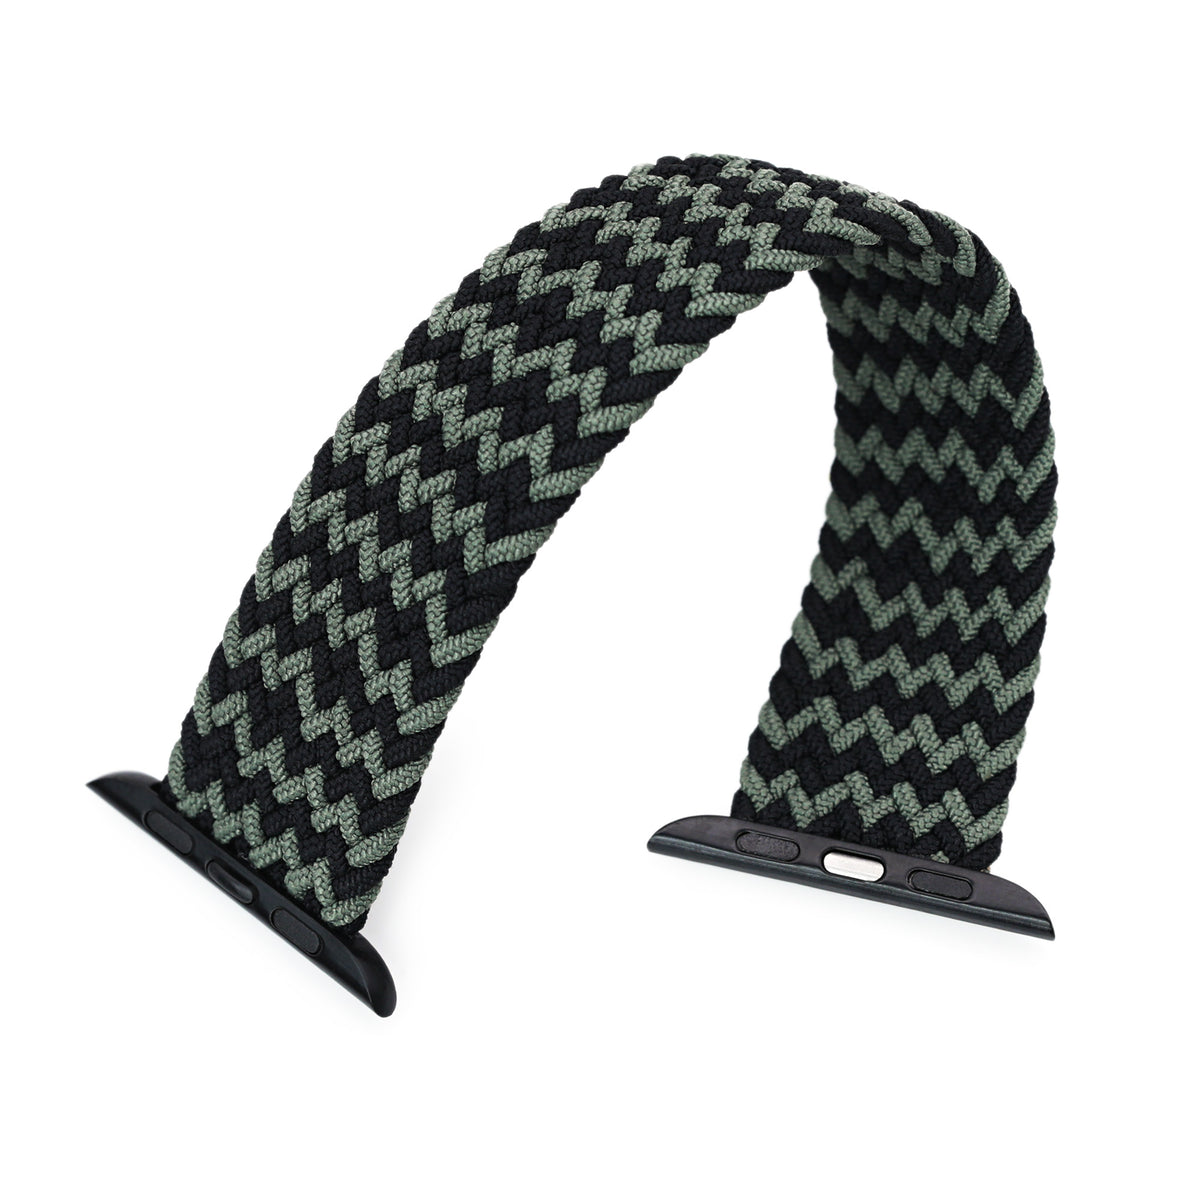 Stretchable Black-Green Solo Loop Braided Apple Watch Band for 44mm / 42mm models Strapcode Watch Bands